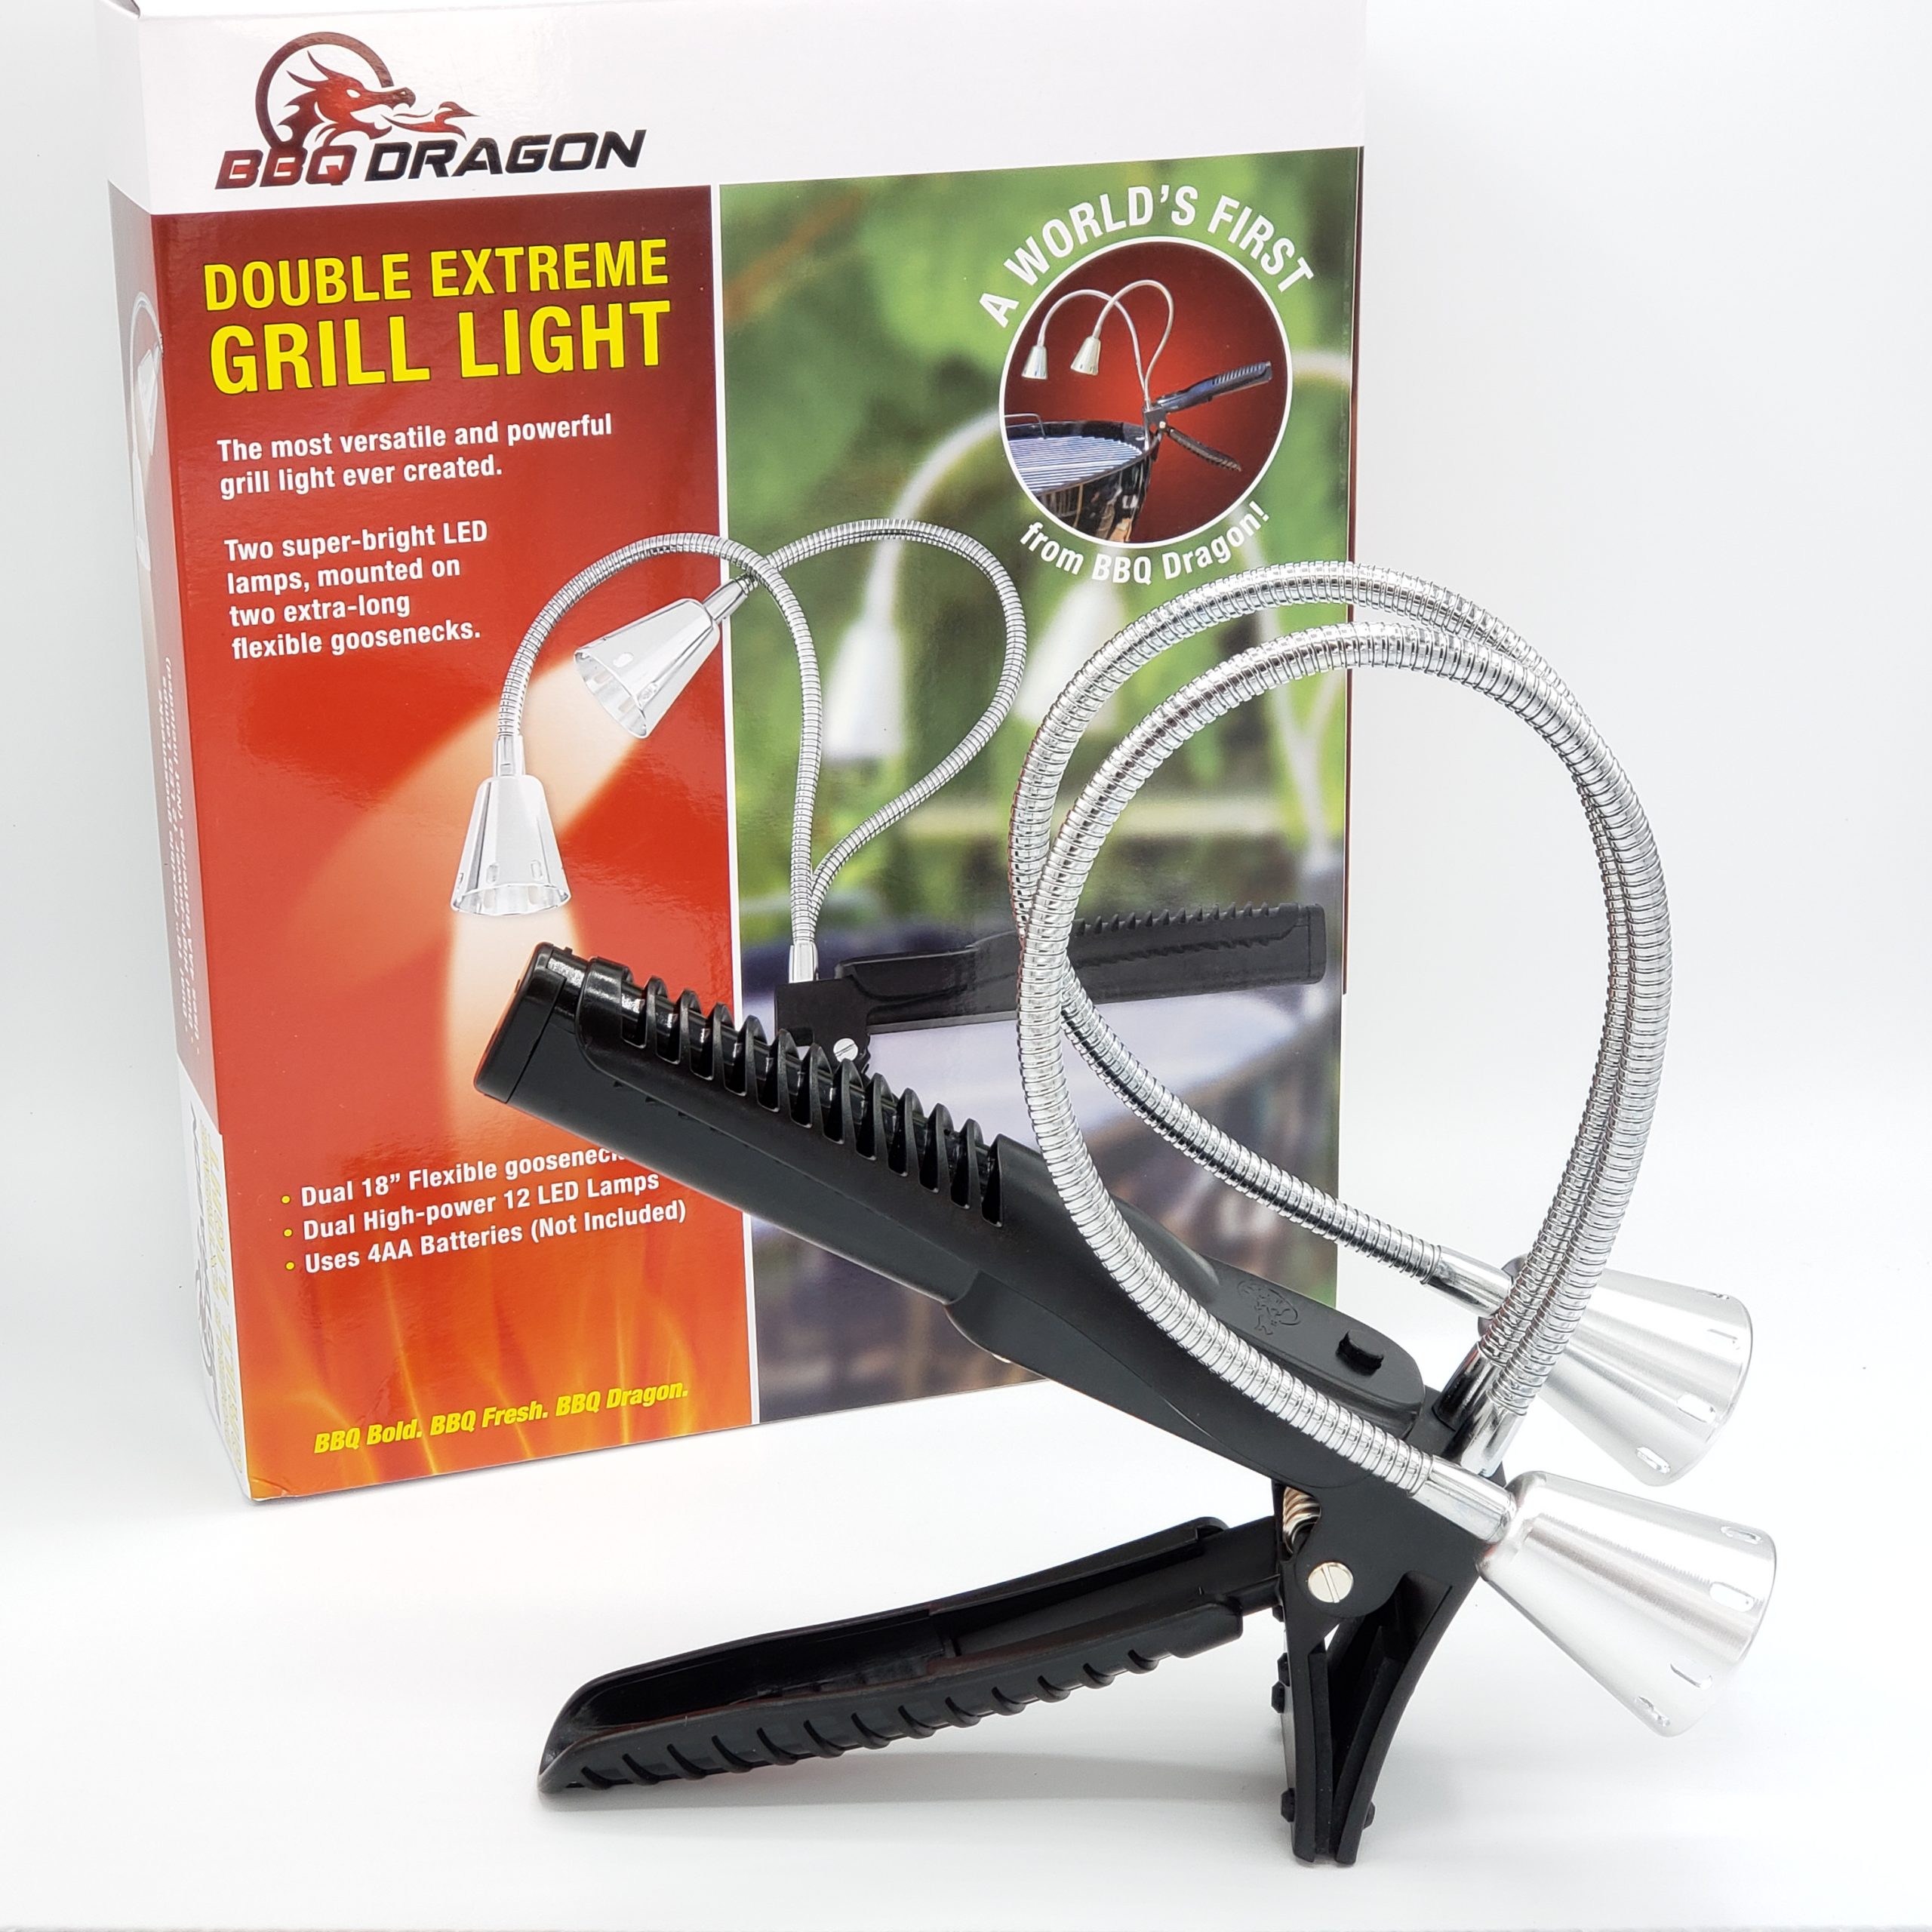 Double Extreme Grill Light with Two Super Bright LED Lamps